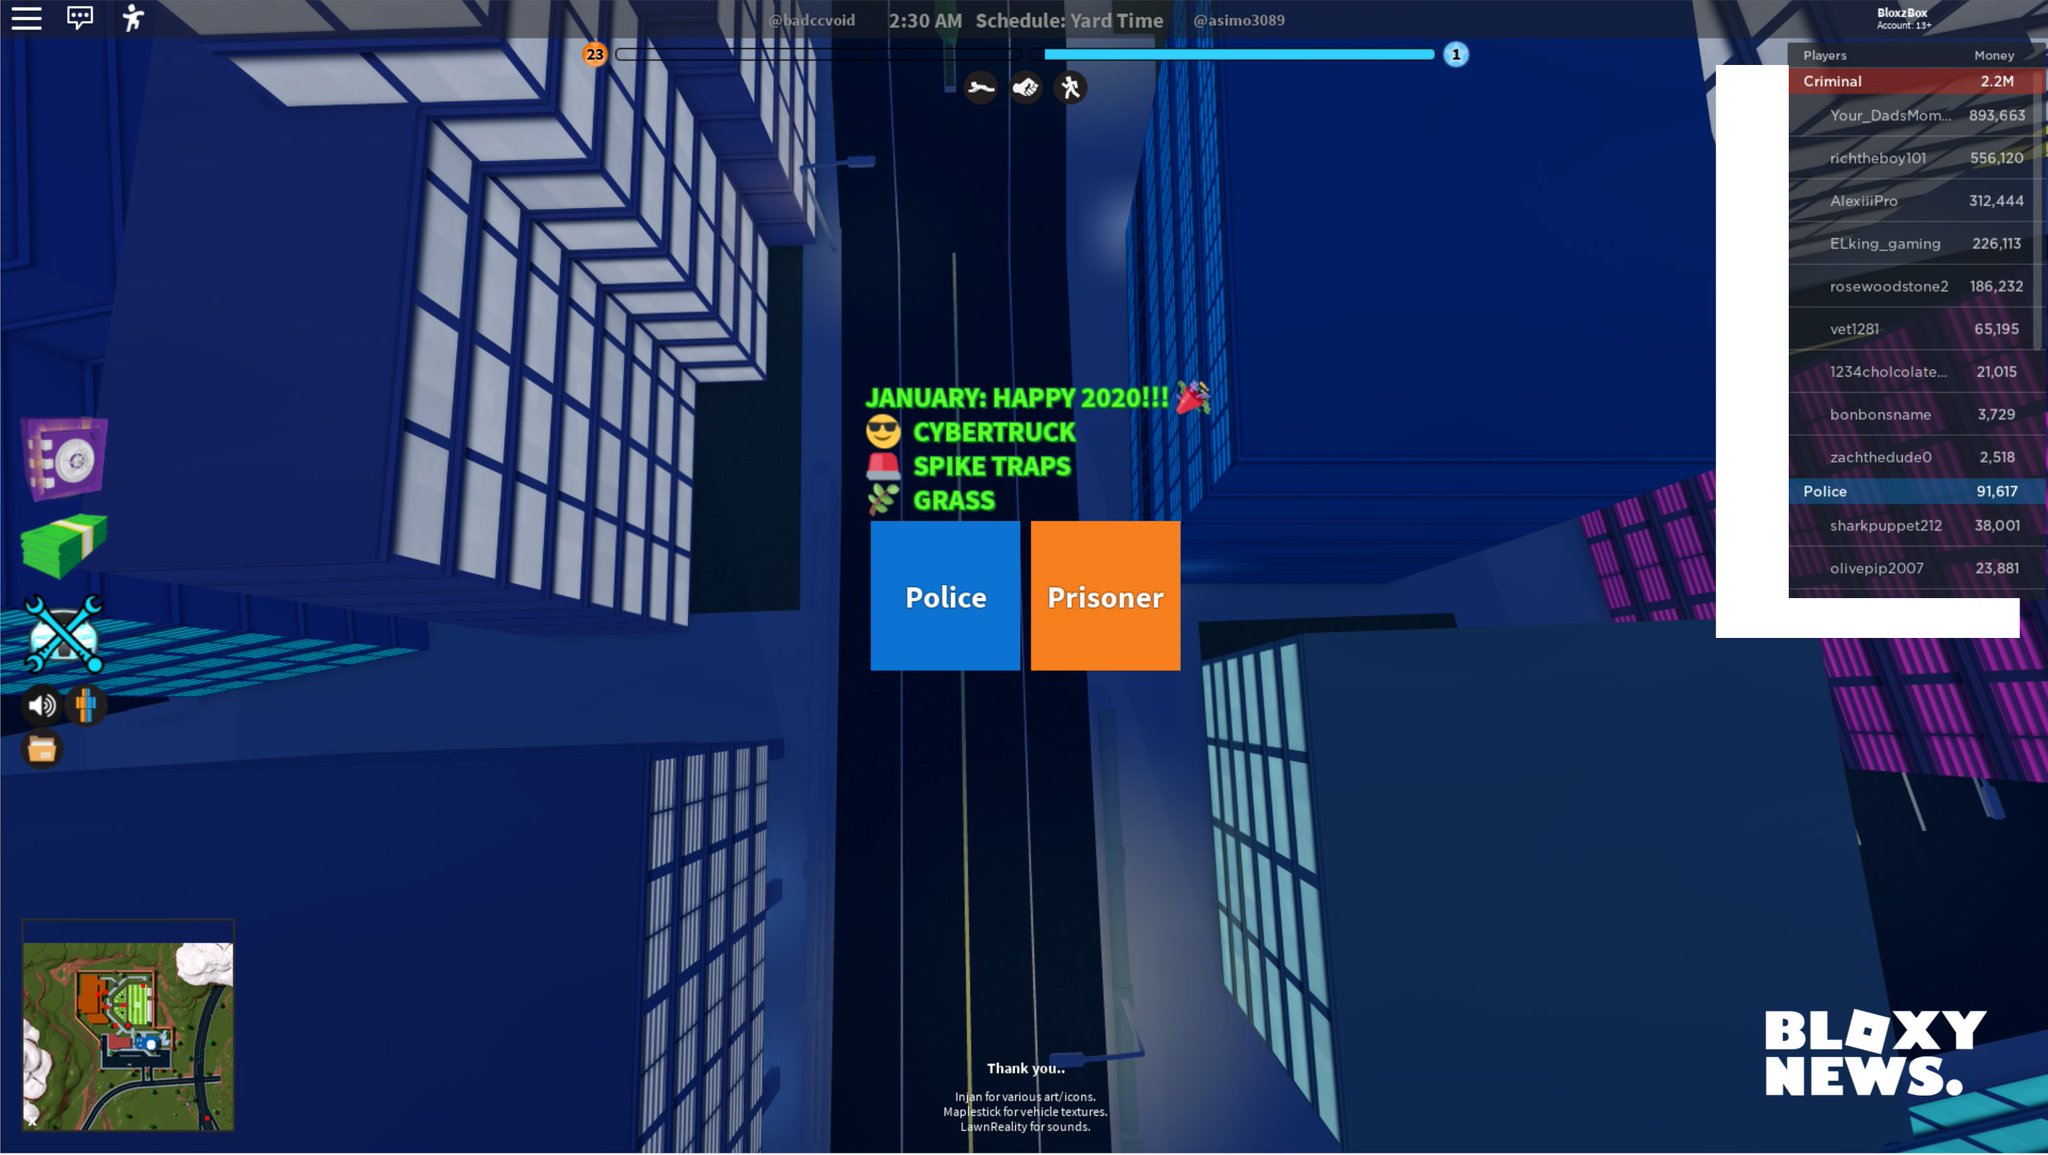 Bloxy News On Twitter The Roblox Leaderboard Has Been Updated Once Again Based On User Feedback The New Leaderboard Is Now Smaller And Takes Up Less Of The Screen The White Box - old roblox leaderboard